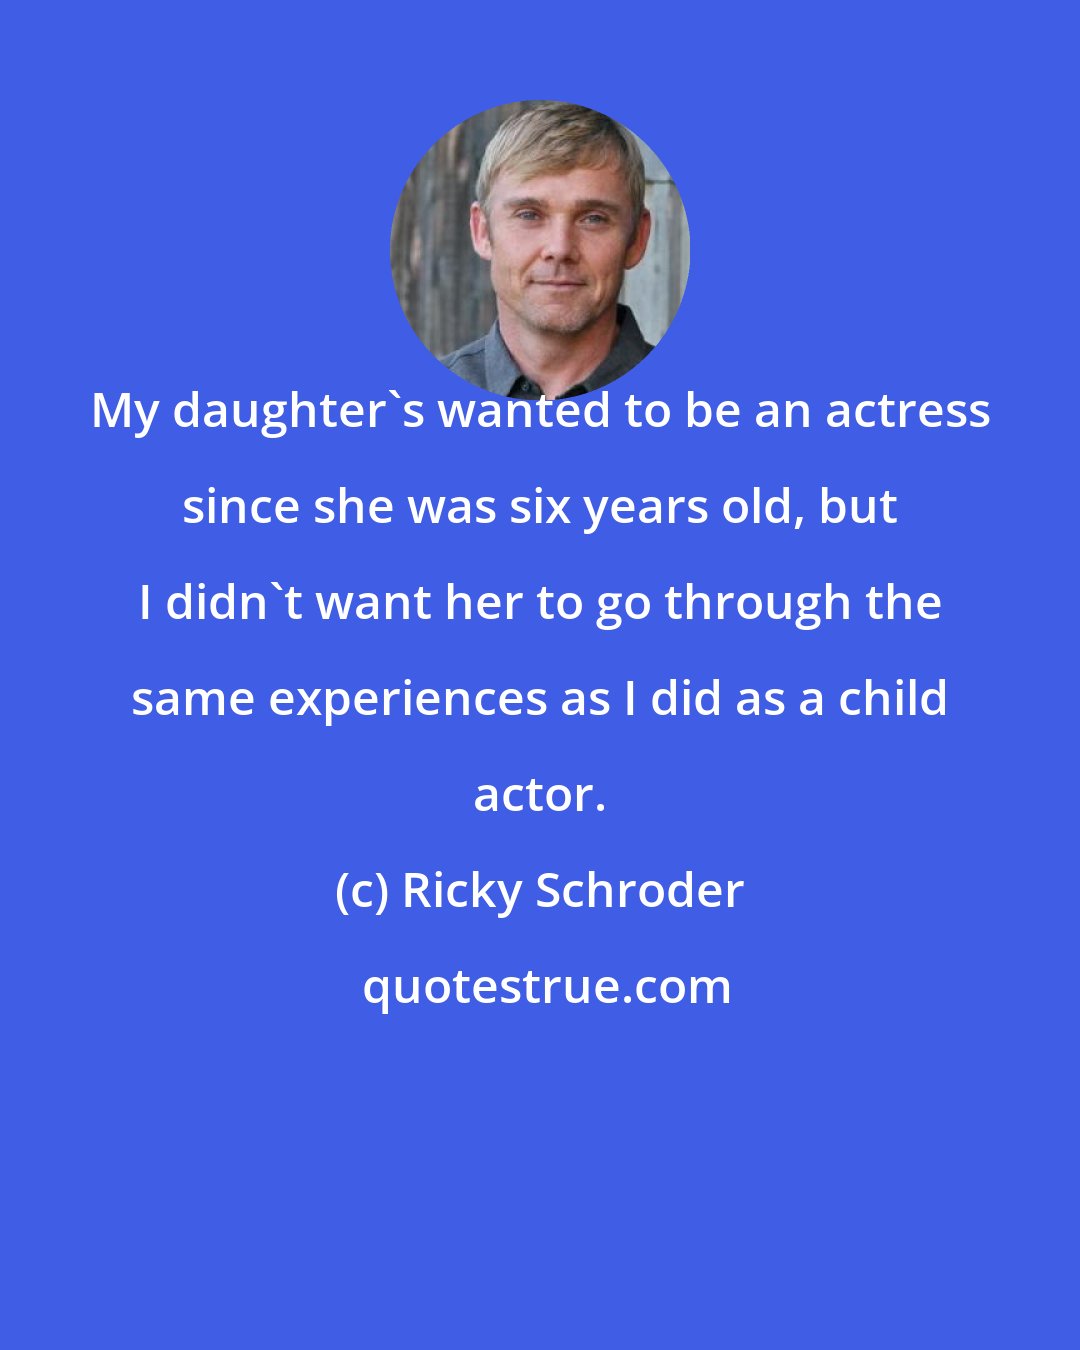 Ricky Schroder: My daughter's wanted to be an actress since she was six years old, but I didn't want her to go through the same experiences as I did as a child actor.